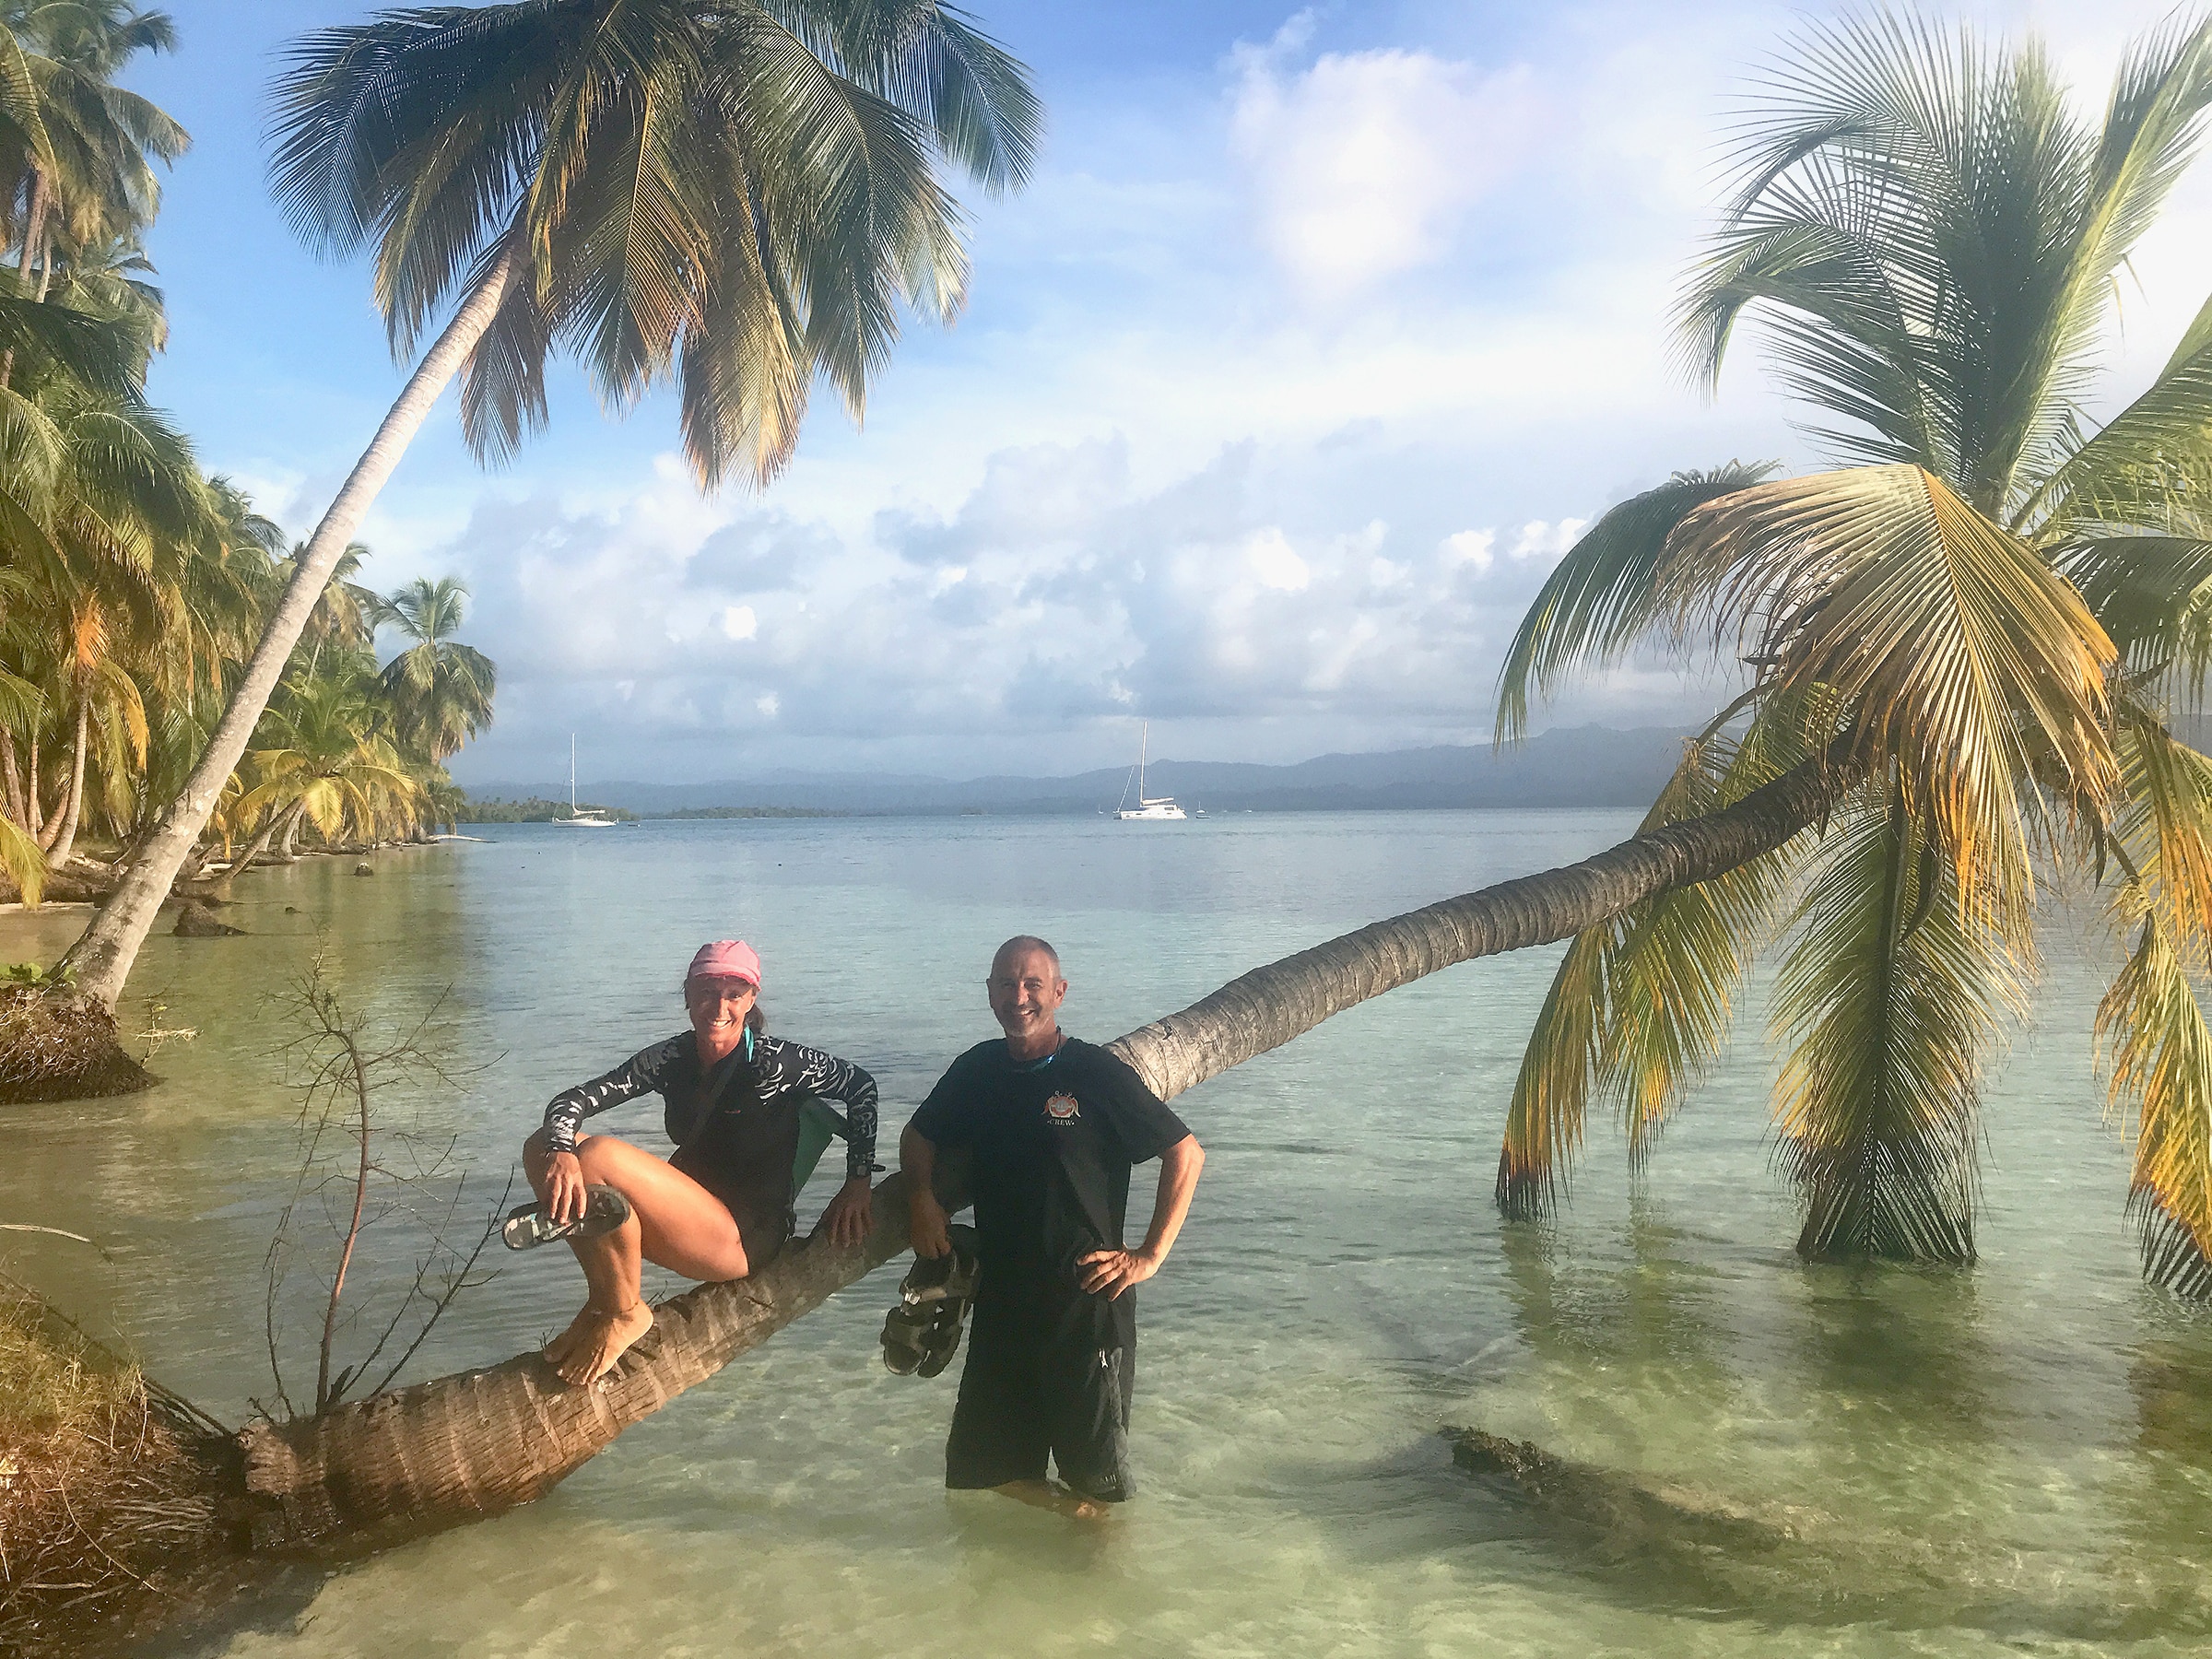 Irenka and Woody Standing next to a palm tree in water